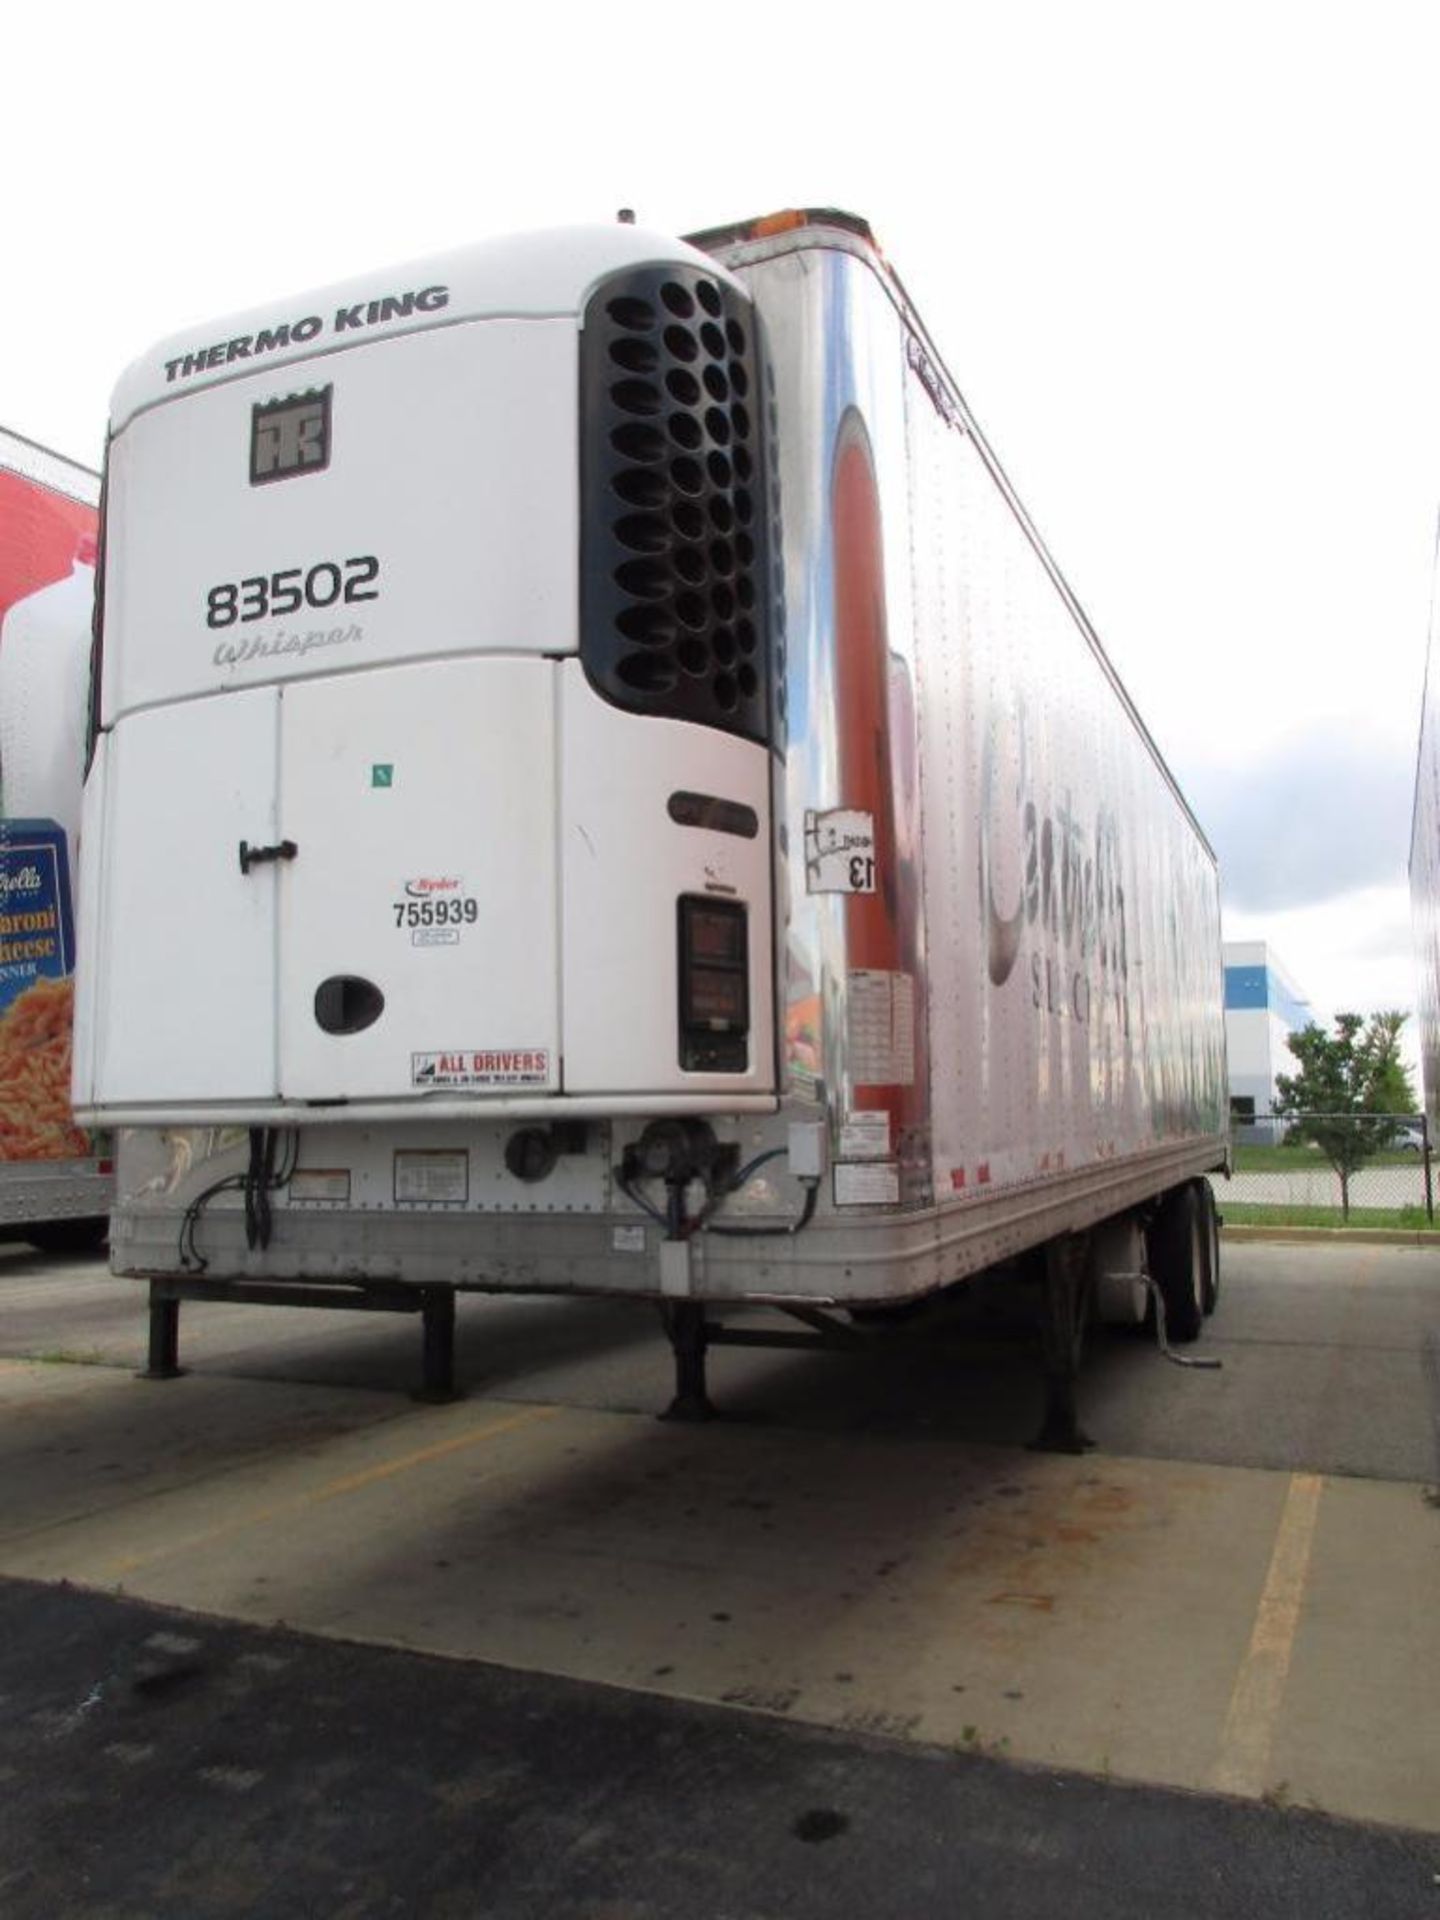 2004 Great Dane 35' Refrigerated Trailer, VIN # 1GRAA70275B703706, Unit 83502 - Image 3 of 28